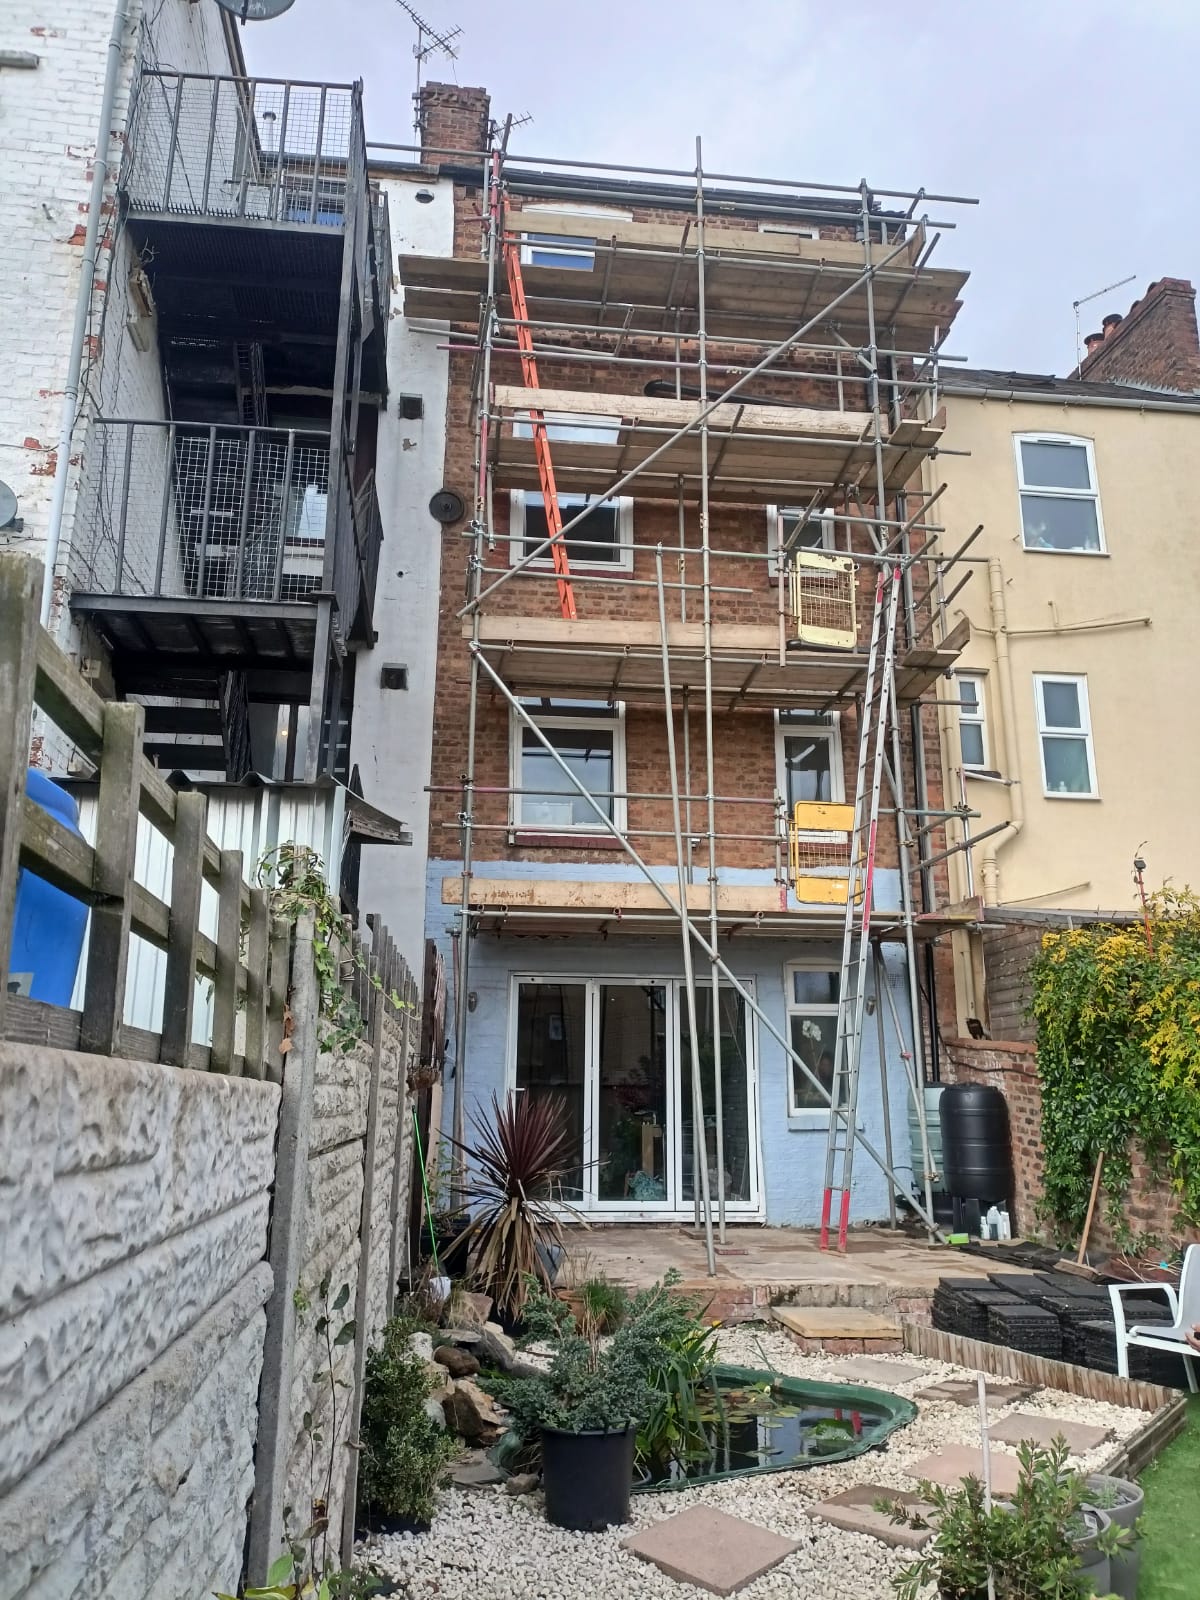 Scaffolding services in Northamptonshire